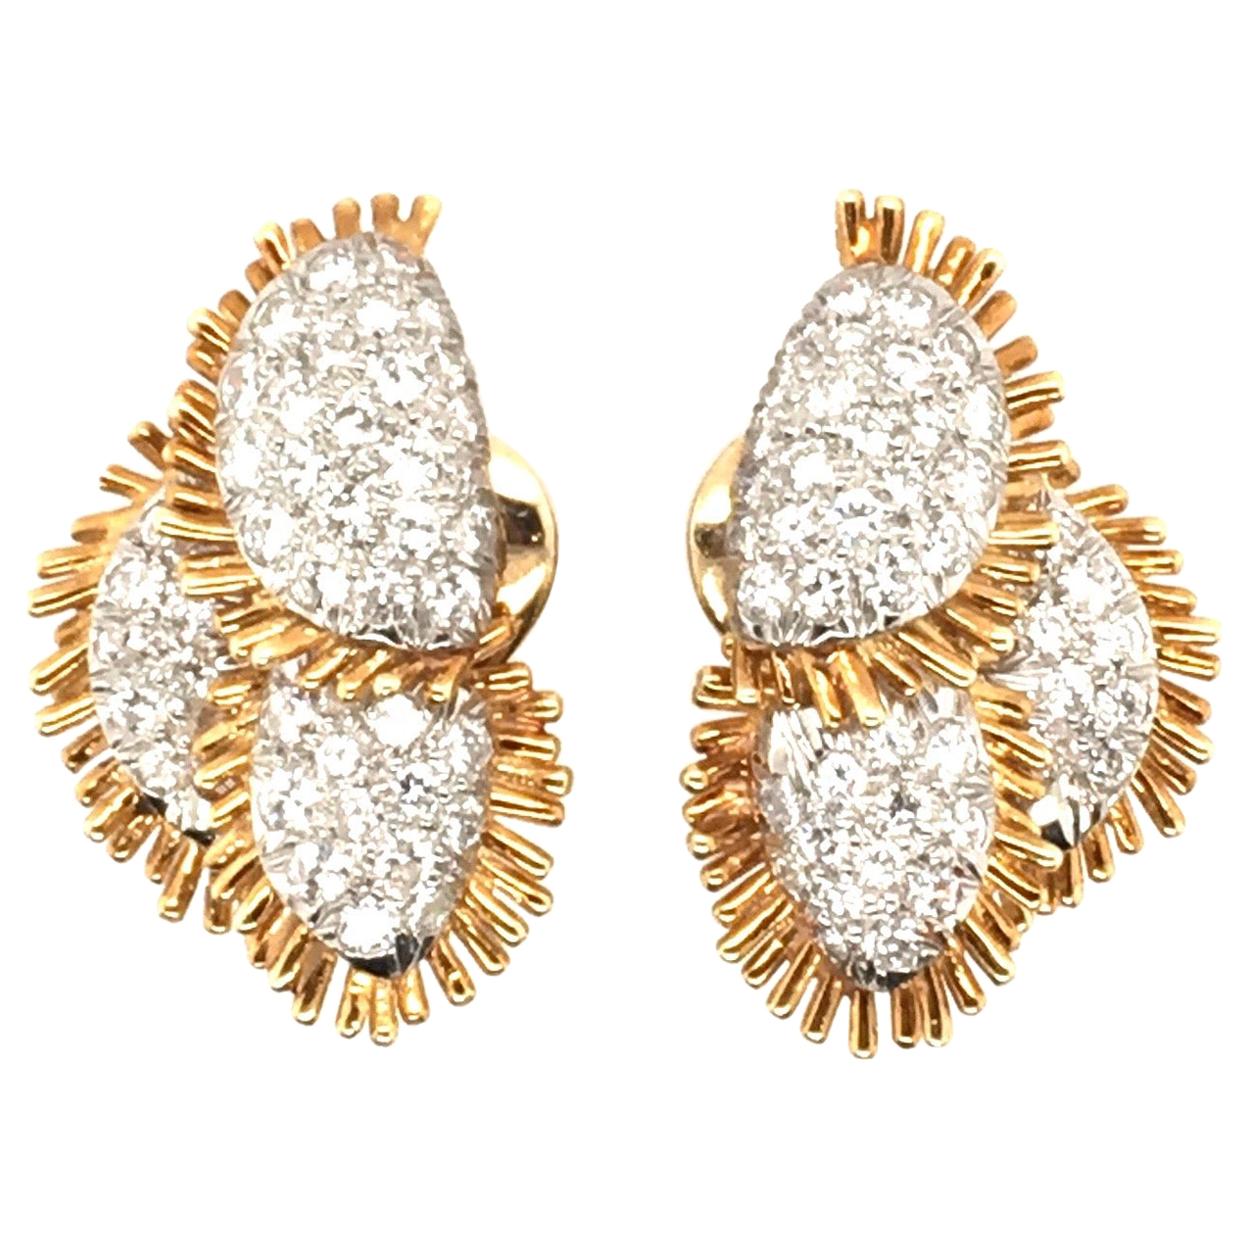 Pair of Yellow Gold, Platinum and Diamond Earrings